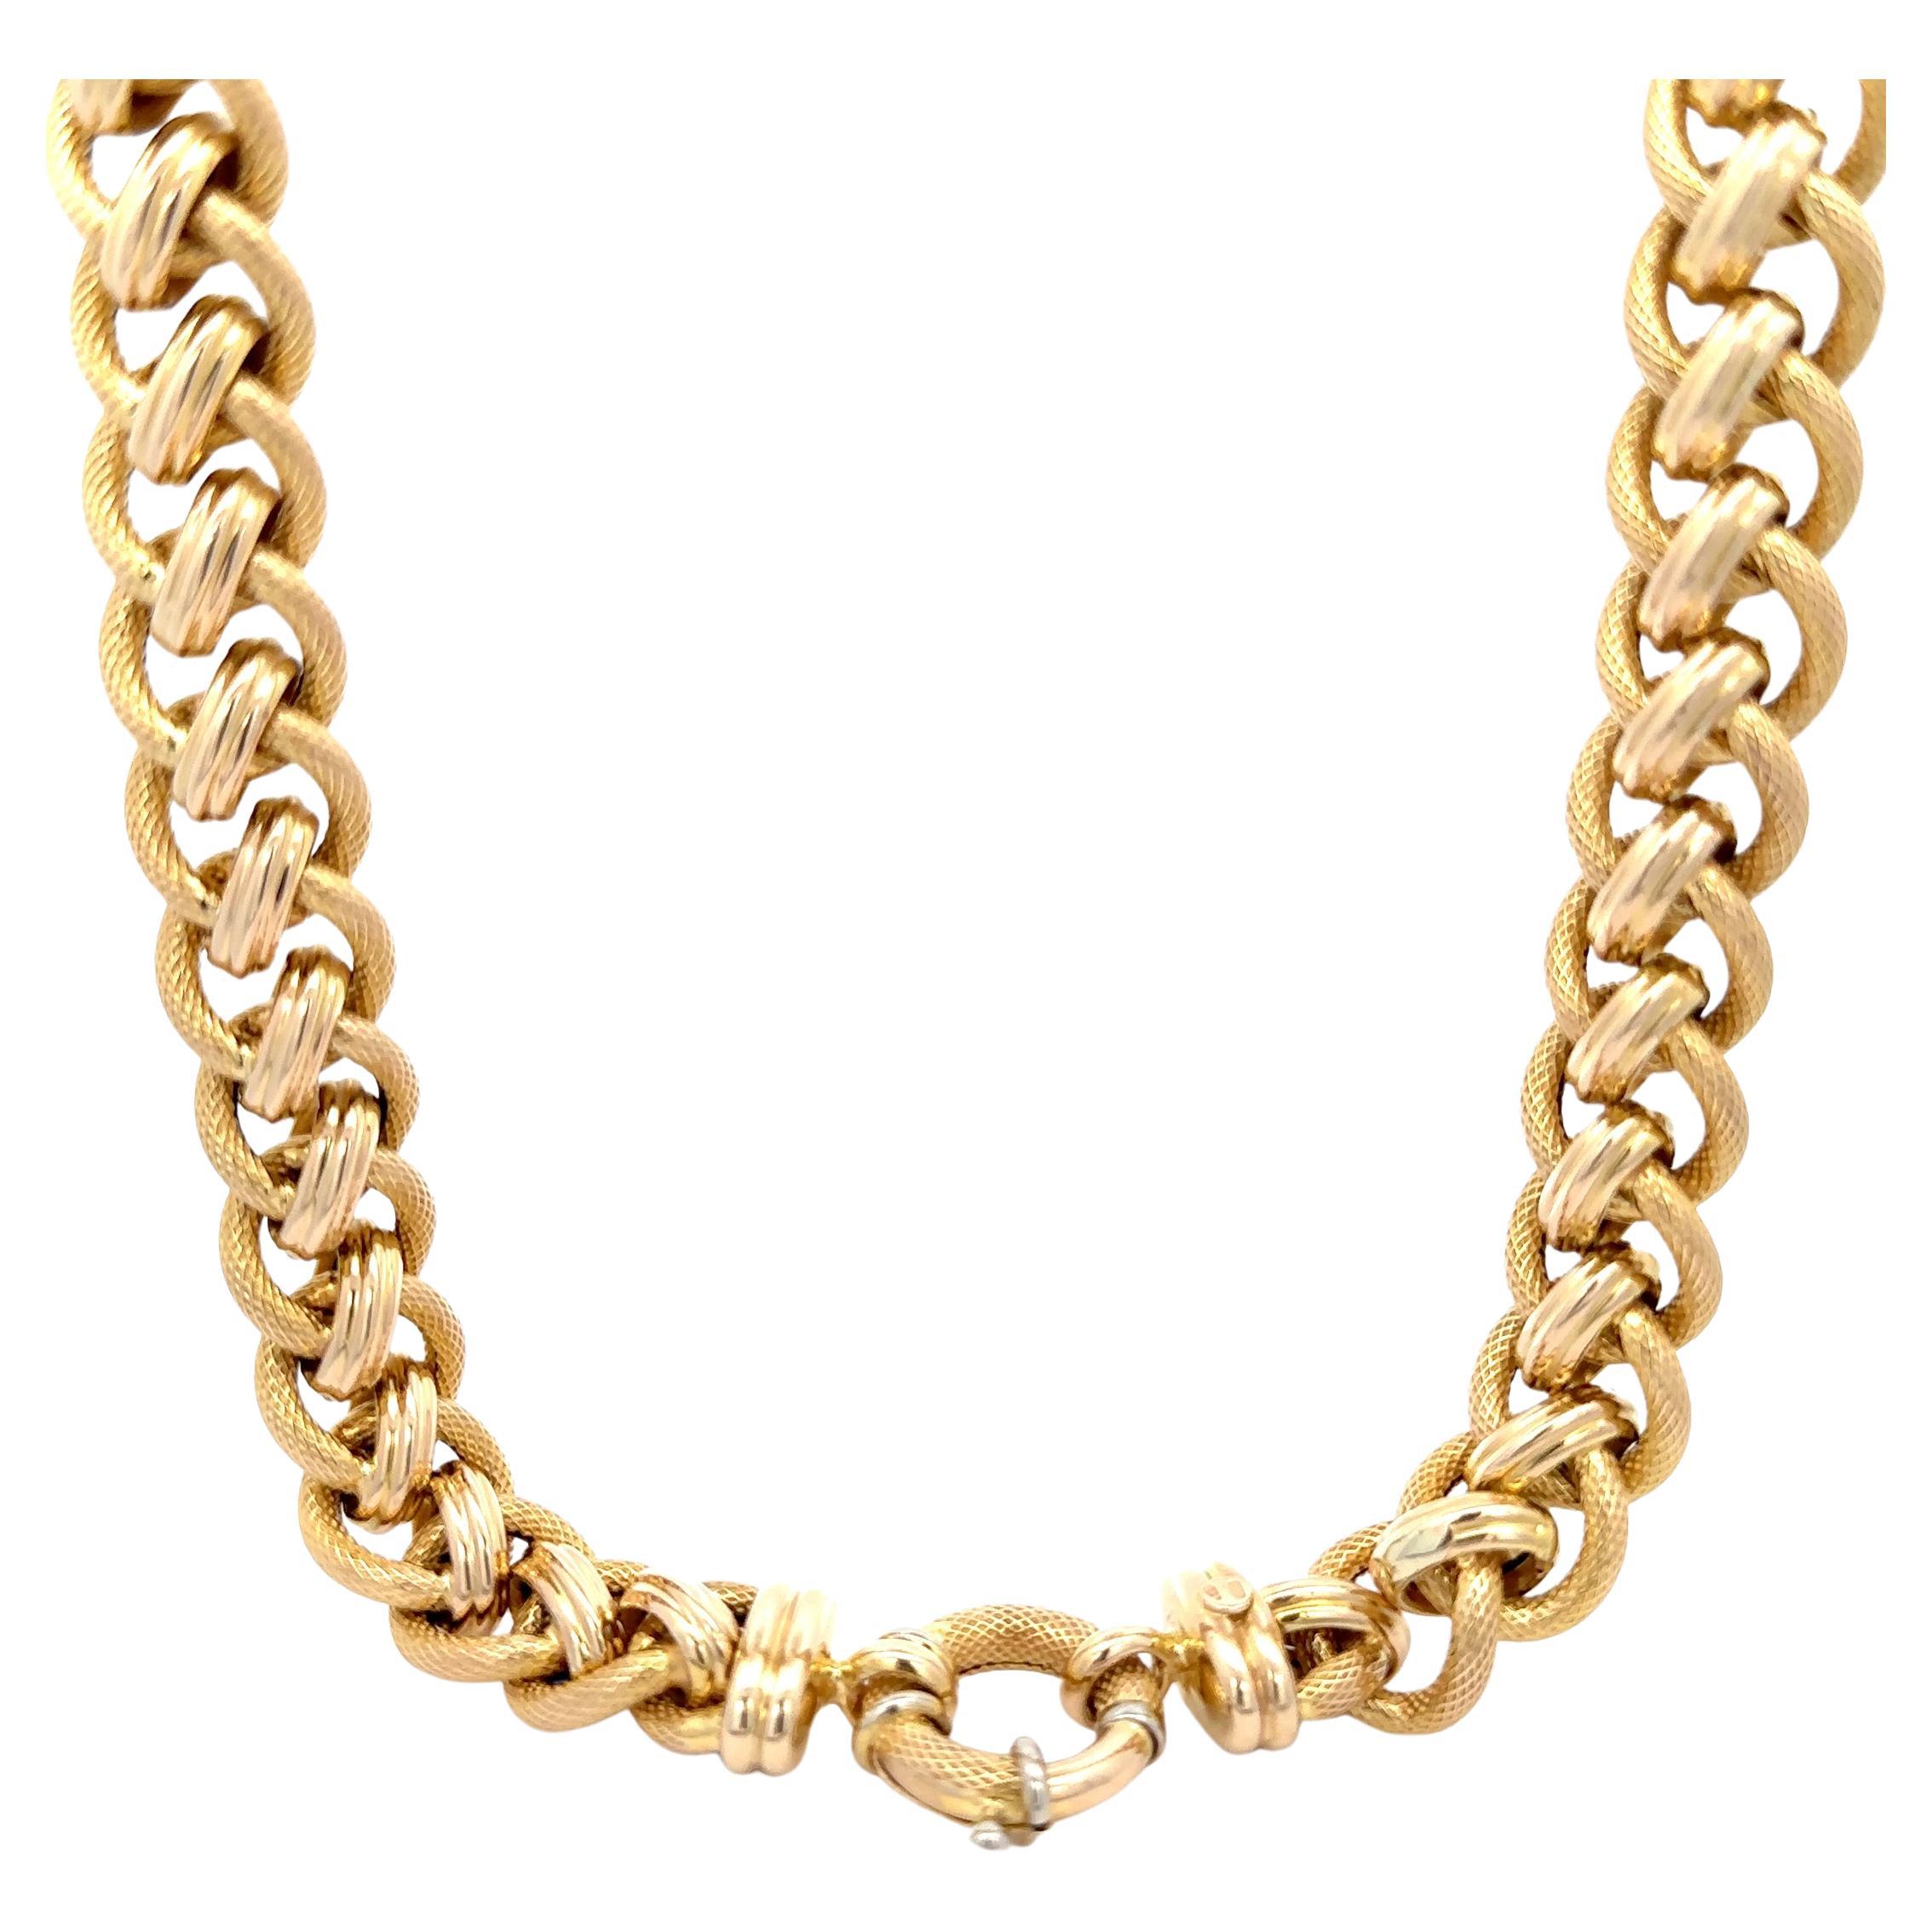 Italian 14k Yellow Gold 17" Wide Interlocking Textured & Polished Link Necklace